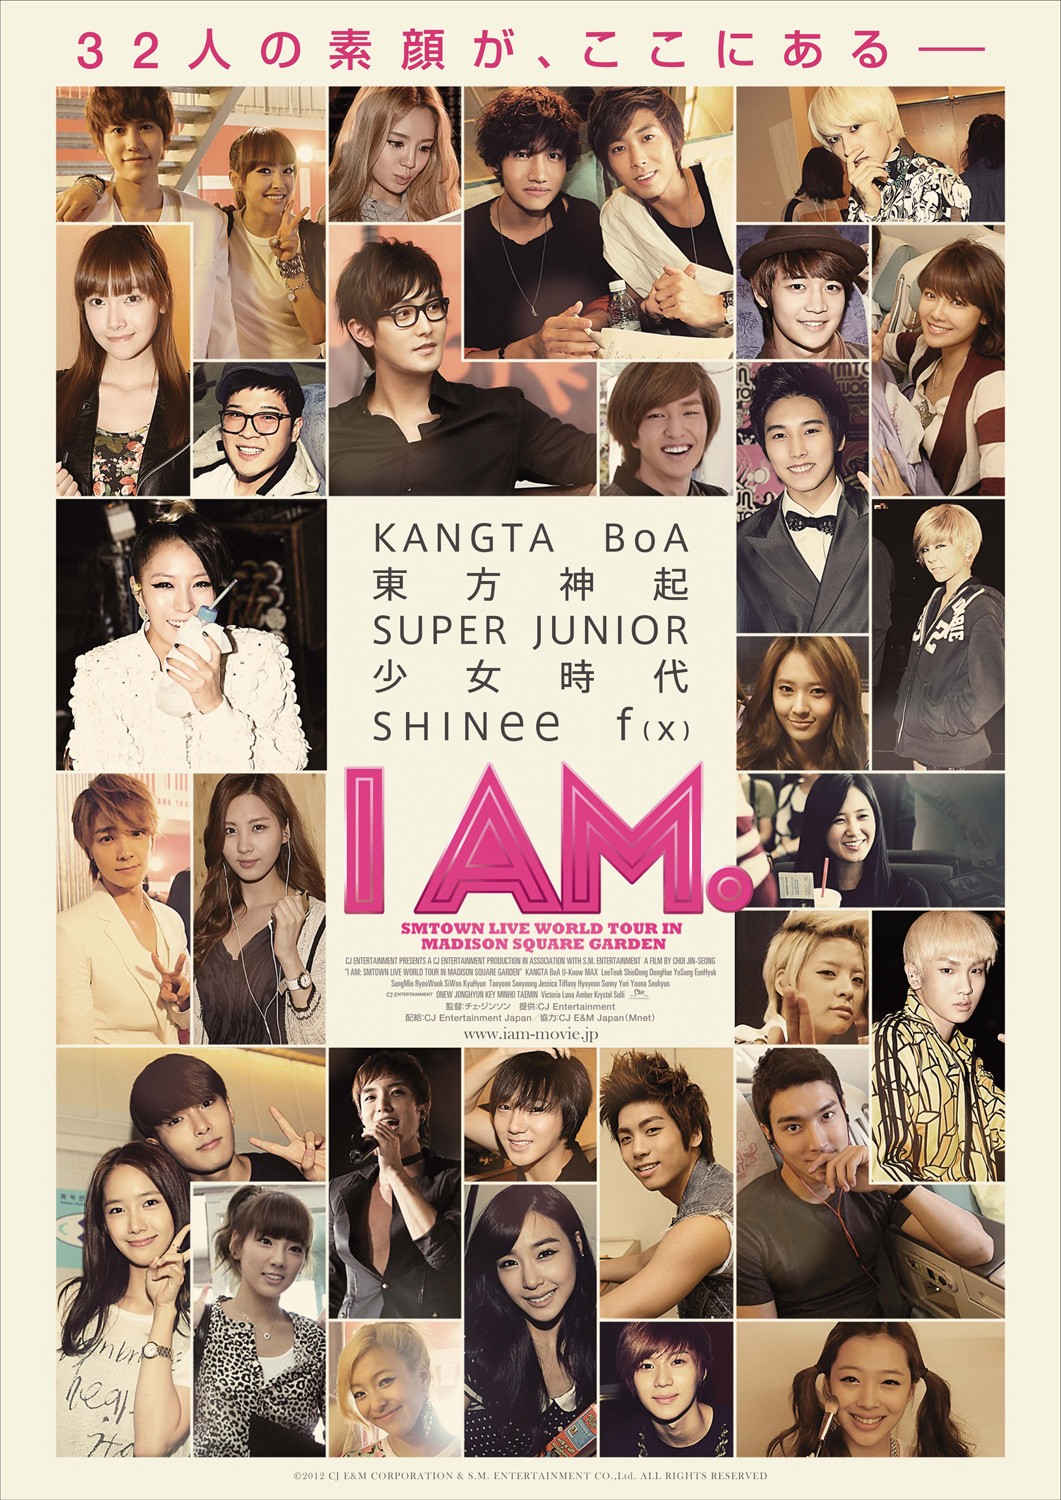 Extra Large Movie Poster Image for I AM. 